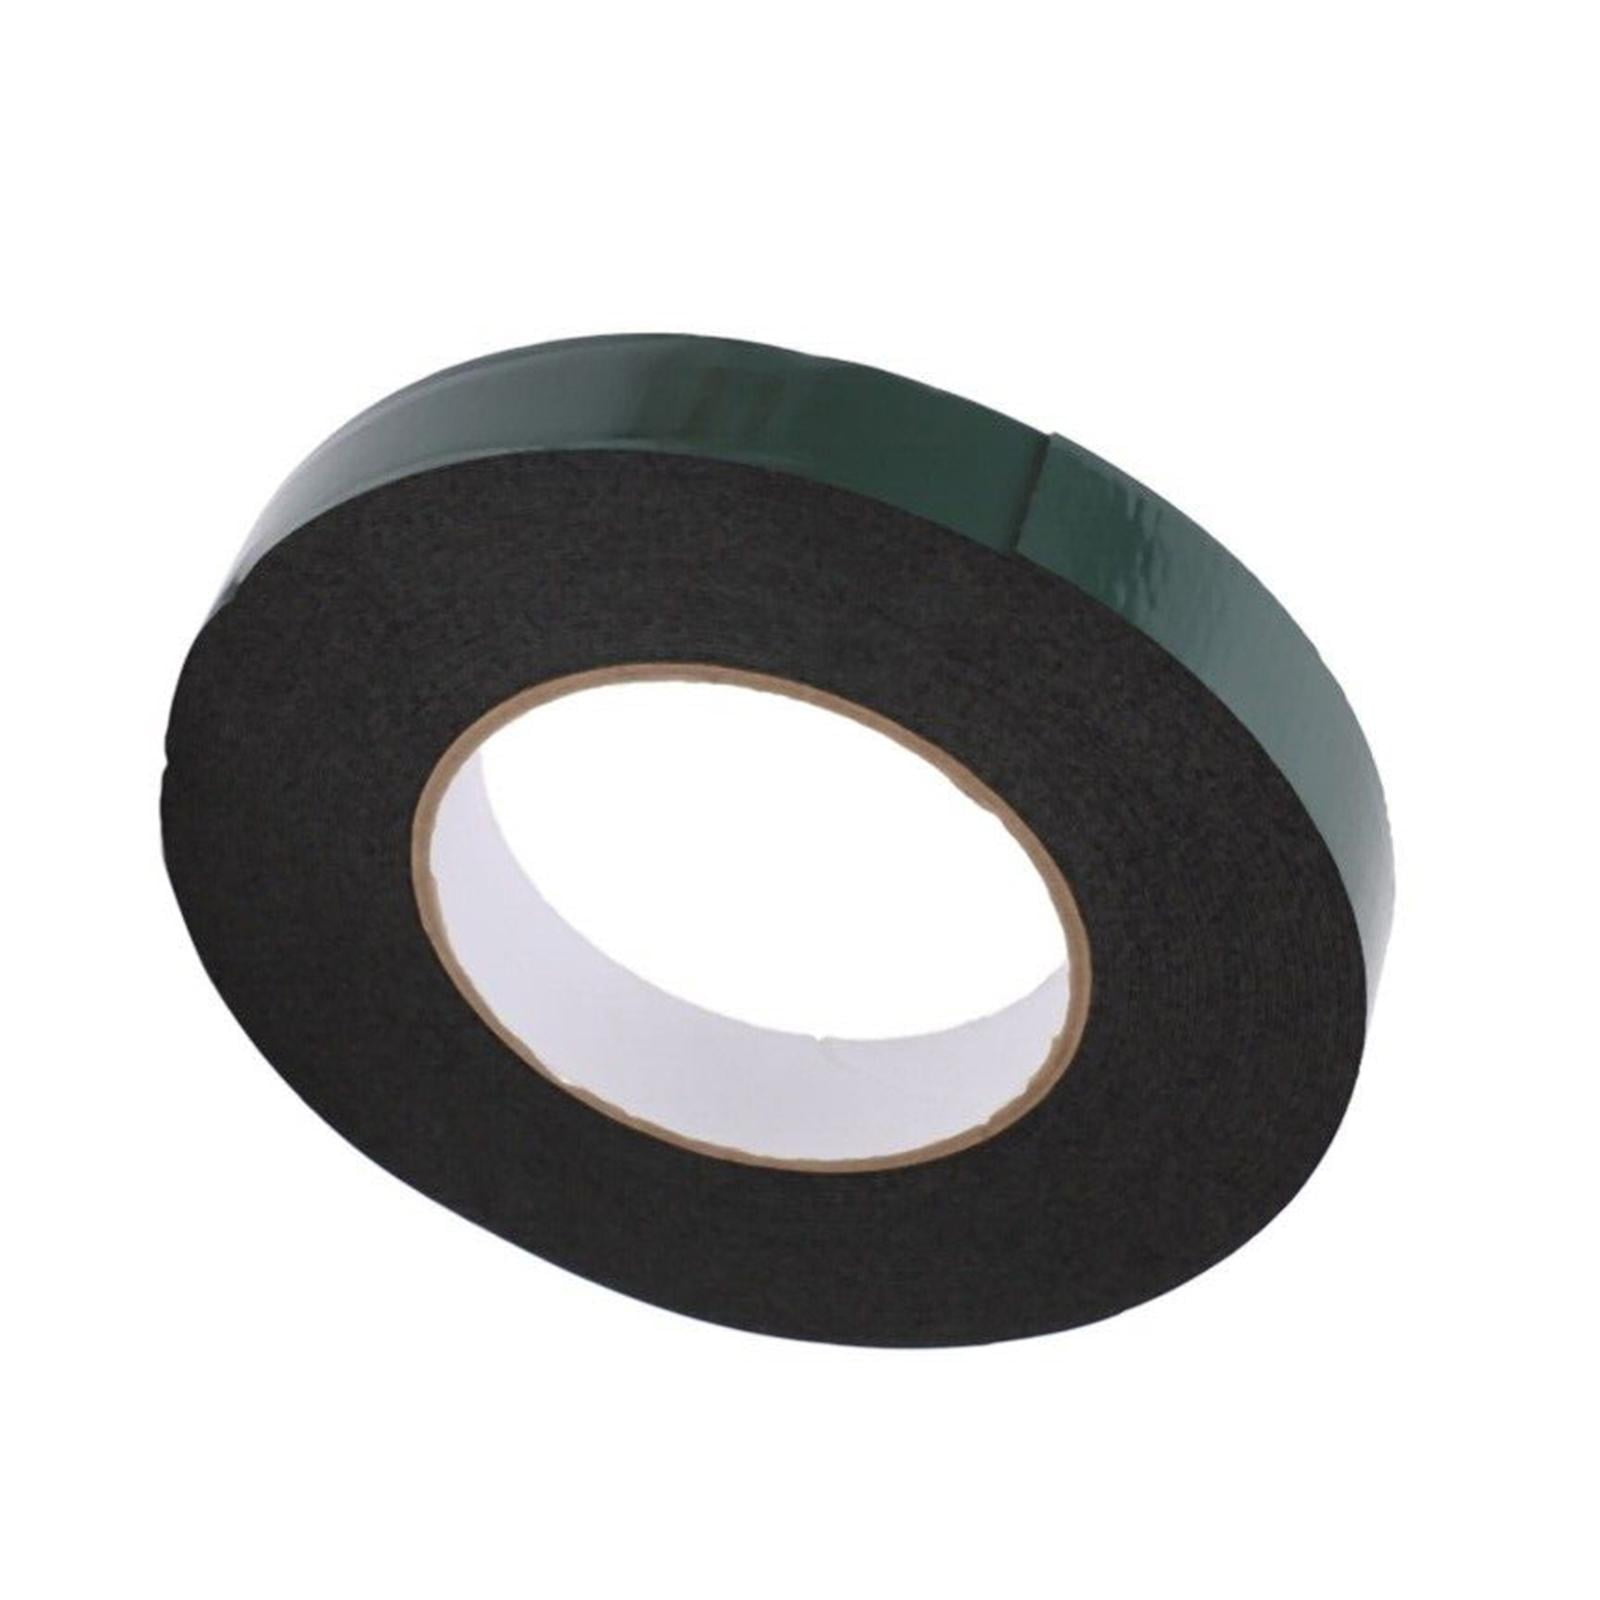 Double Sided Tape for Walls - Heavy Duty Mounting Tape - Strong